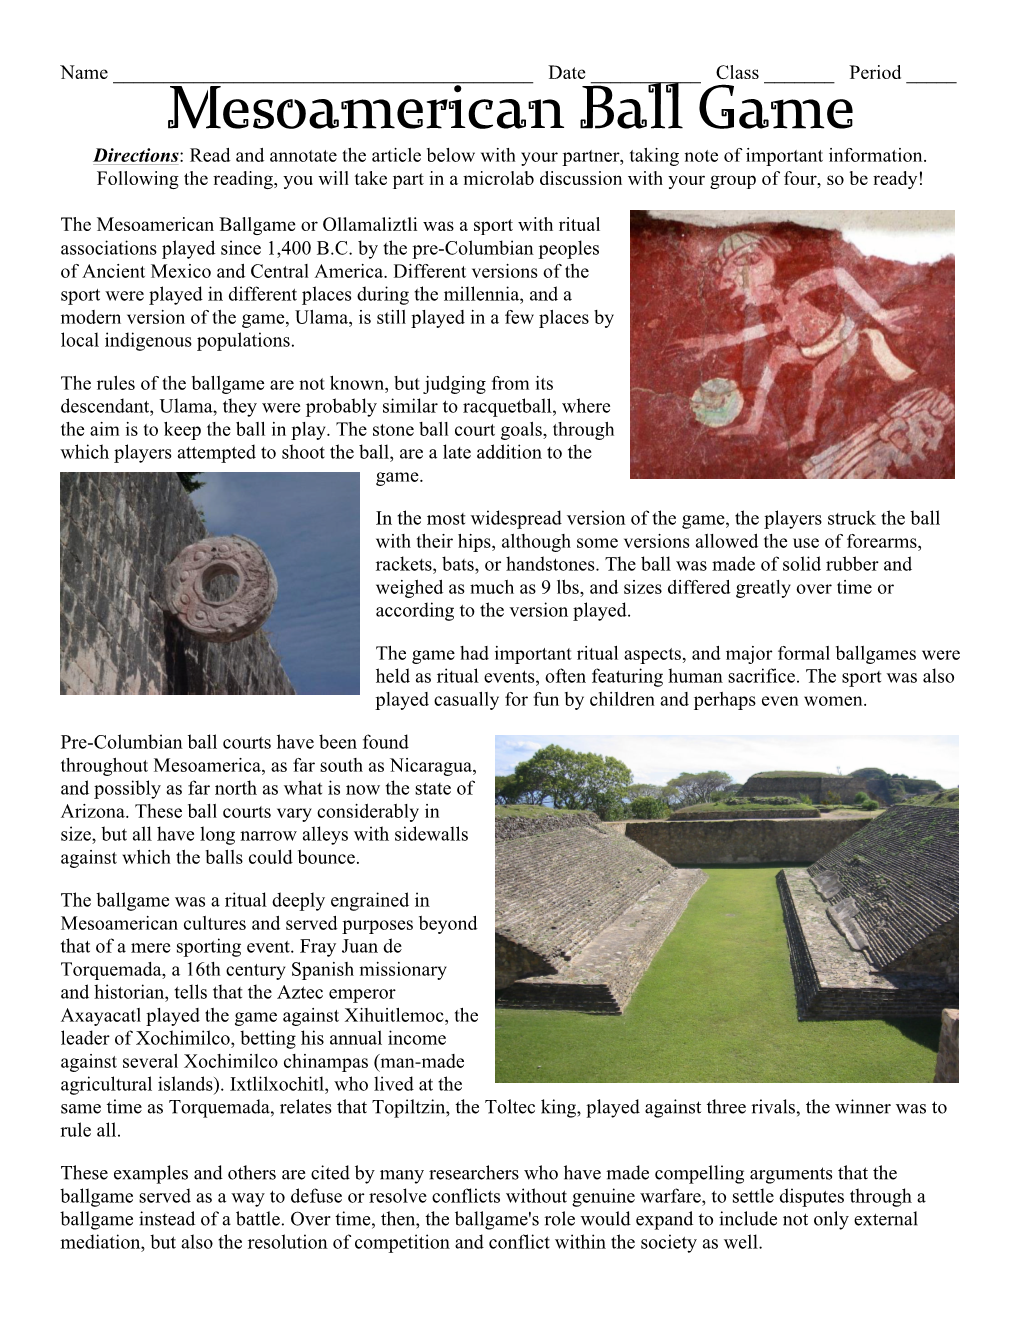 Mesoamerican Ball Game Directions: Read and Annotate the Article Below with Your Partner, Taking Note of Important Information